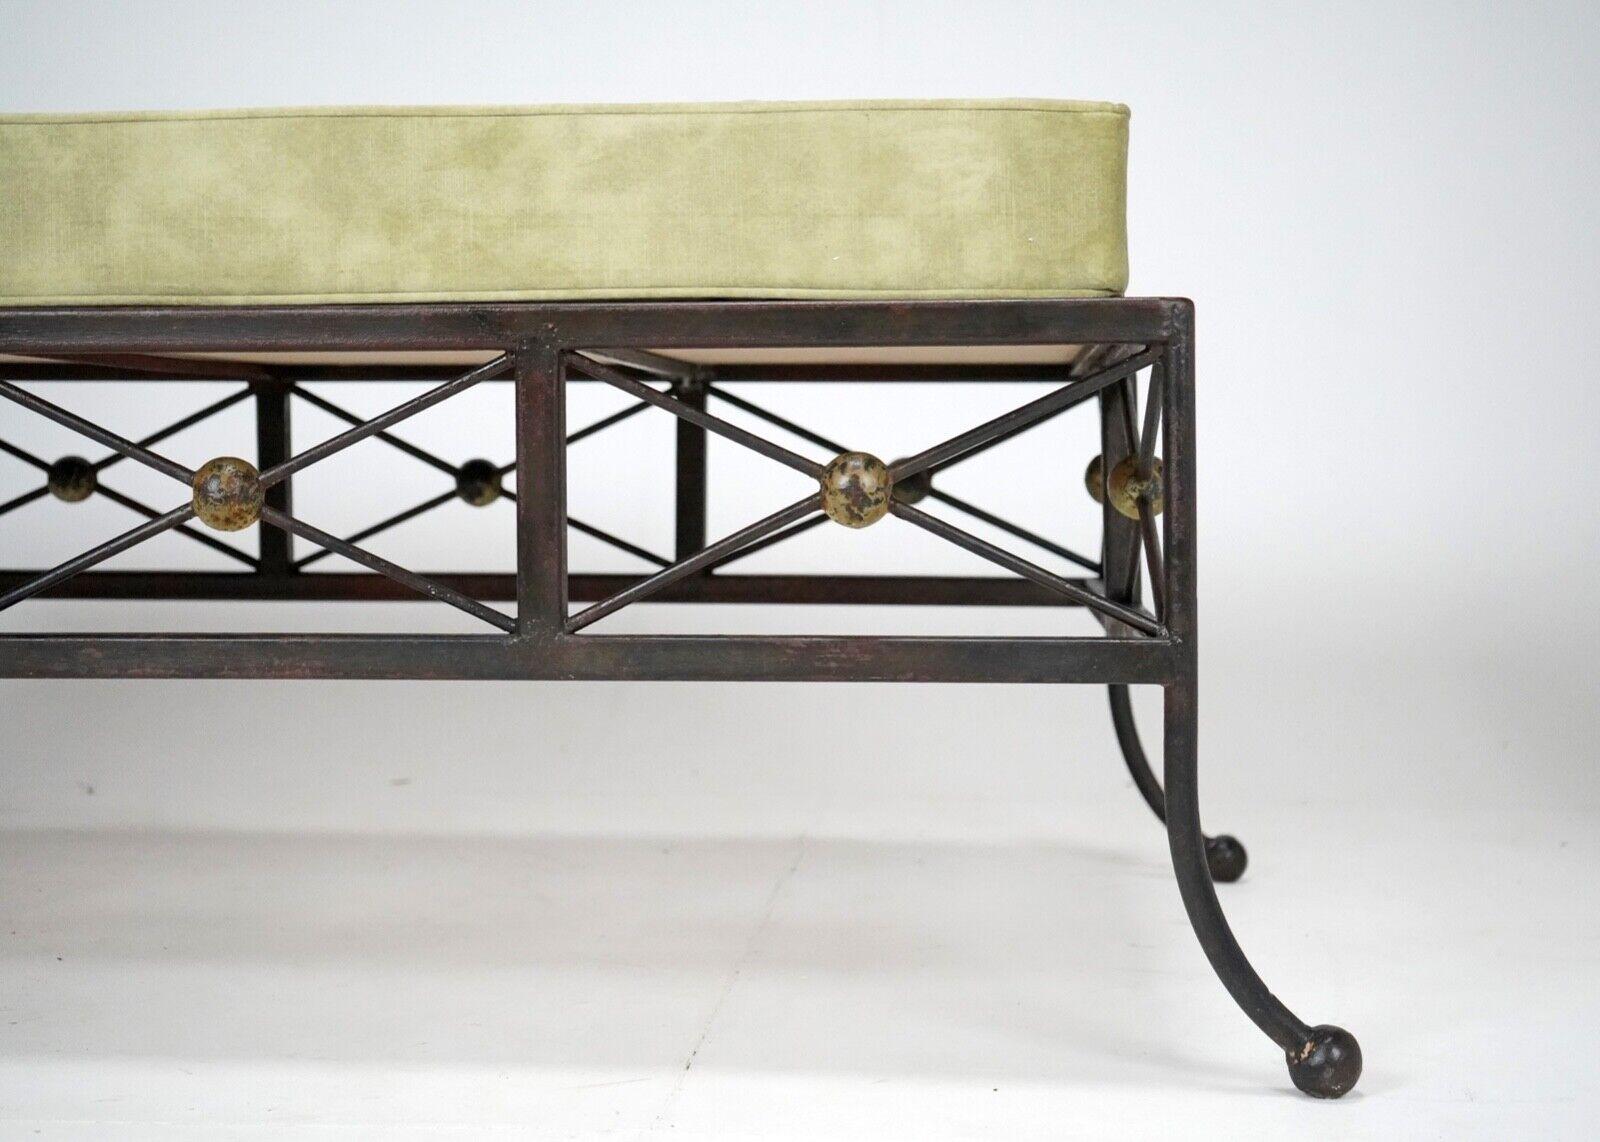 Vintage French Box Steel Metal Day Bed, Sun Lounger, Chaise Lounge Green Seat 2